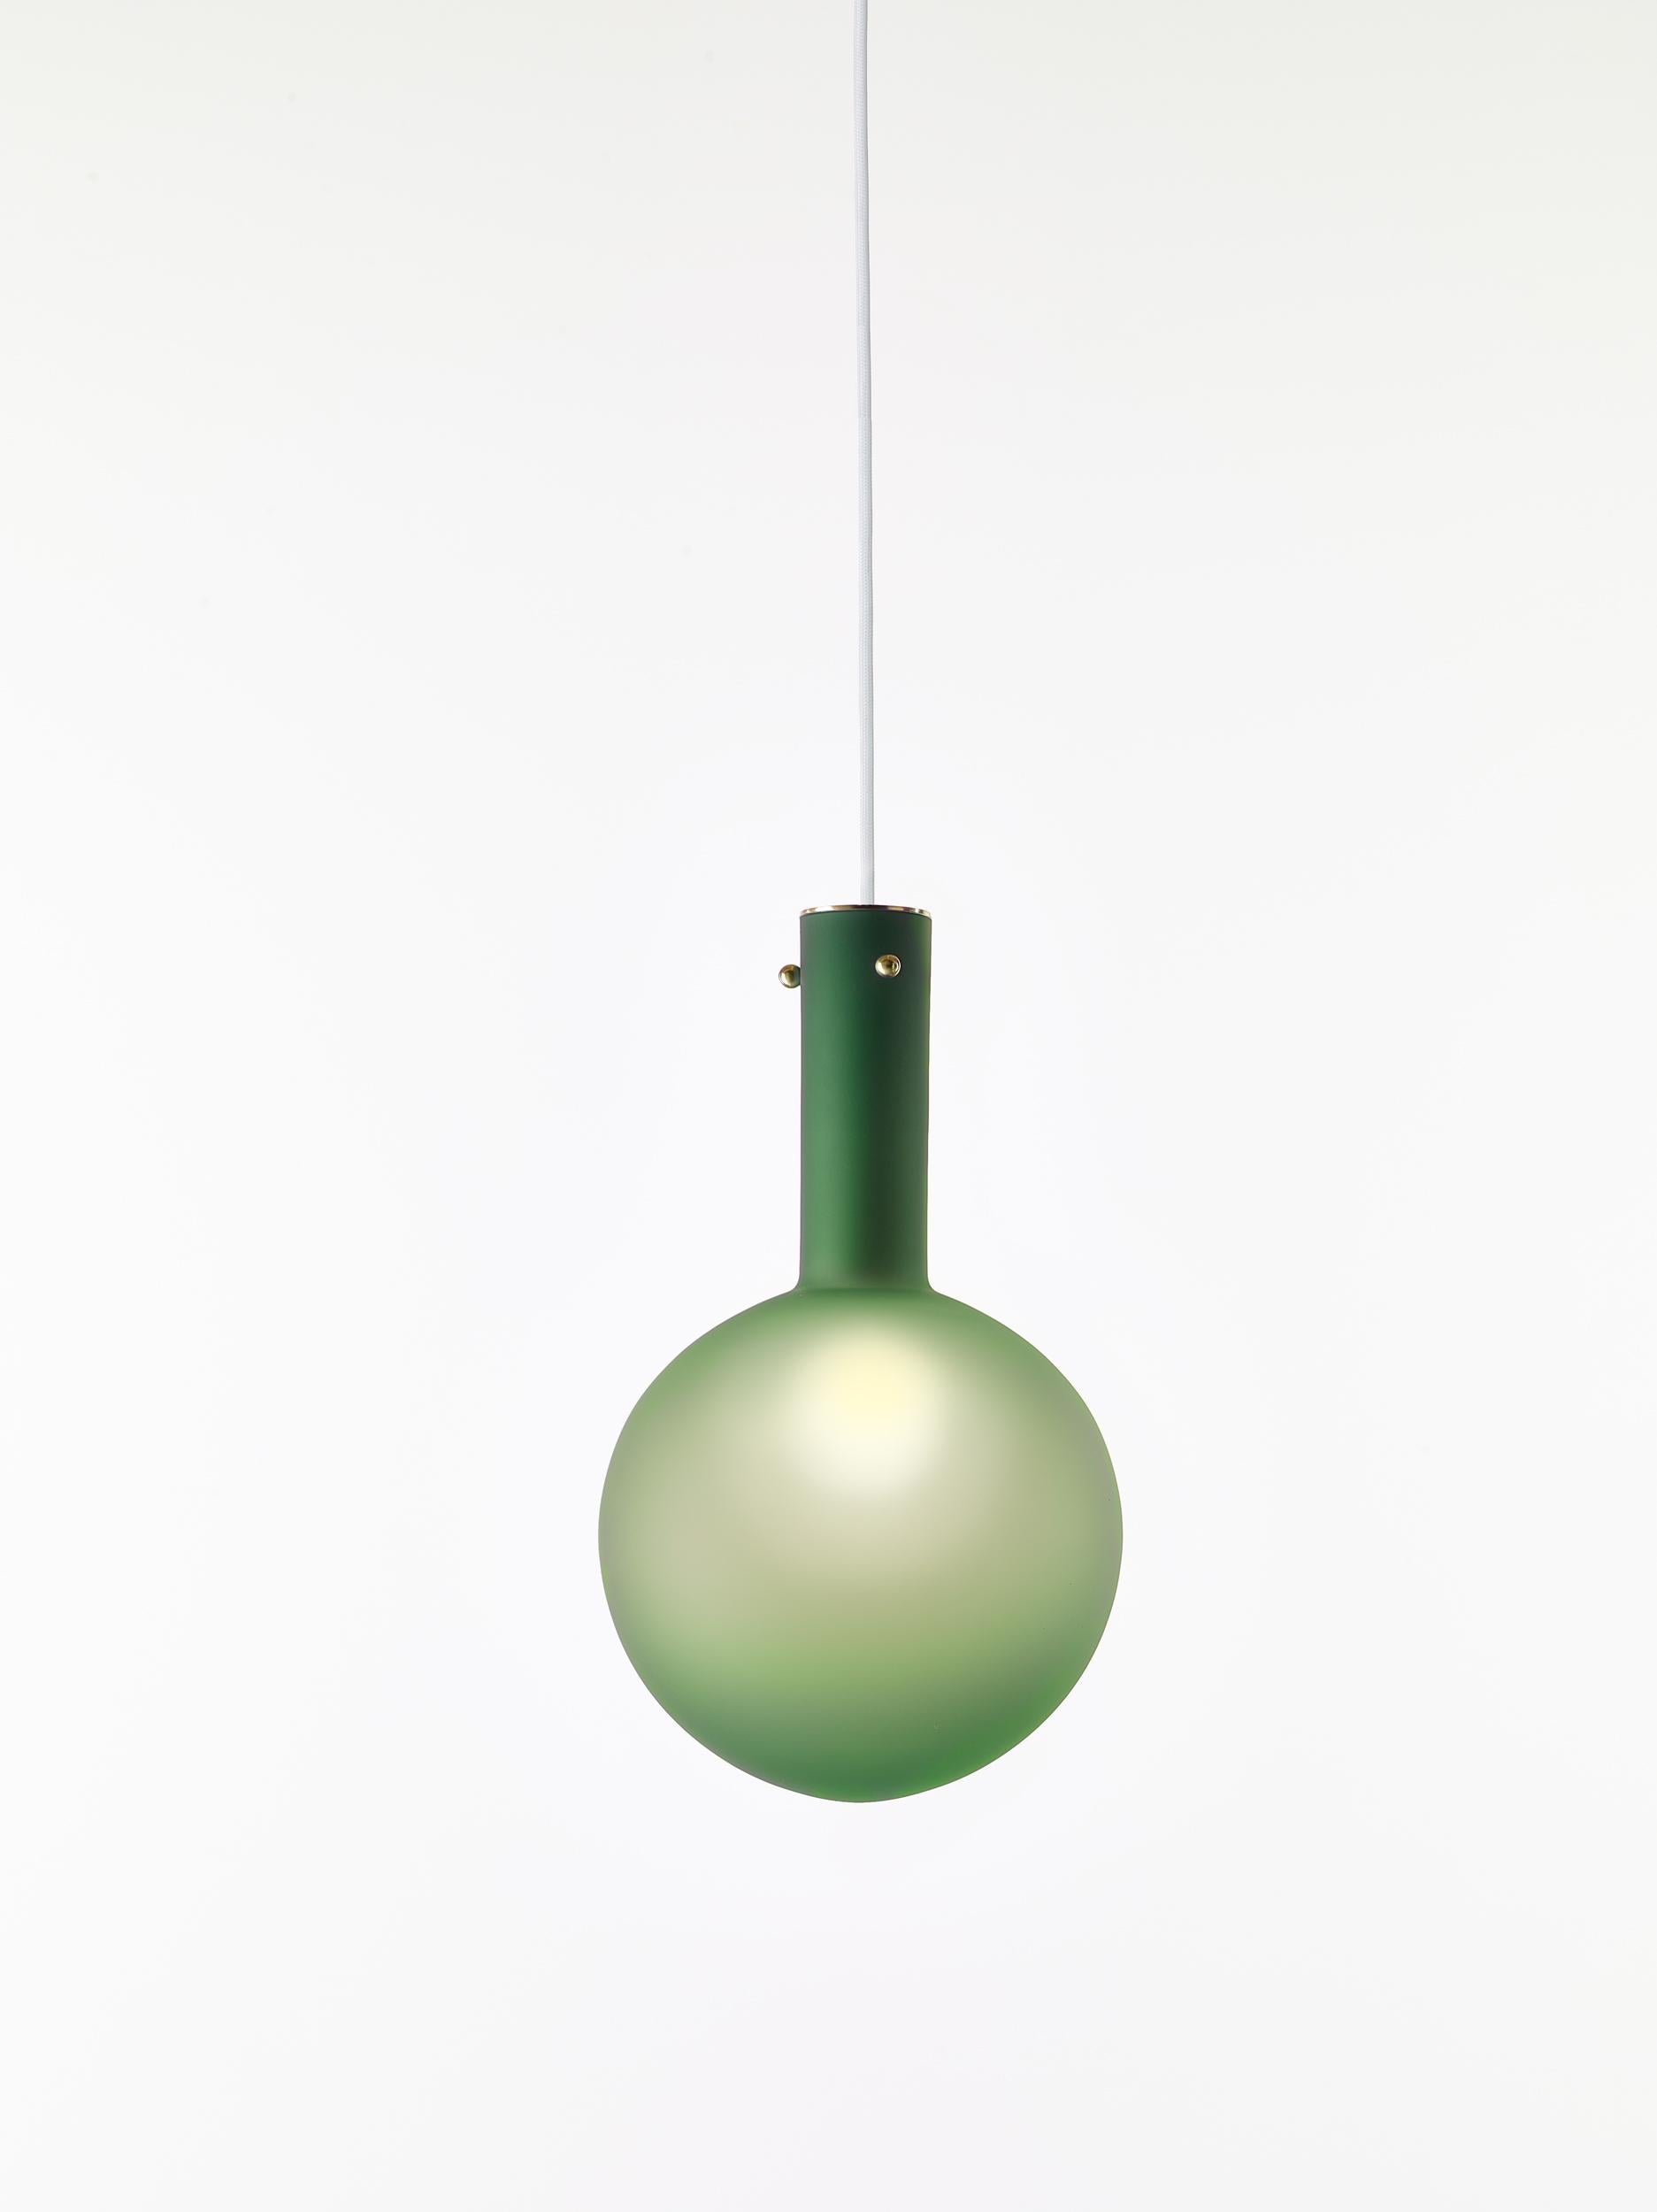 Matte green sphaerae pendant light by Dechem Studio
Dimensions: D 20 x H 180 cm
Materials: brass, metal, glass.
Also available: different finishes and colours available,

Only one homogenous piece of hand-blown glass creates the main body of